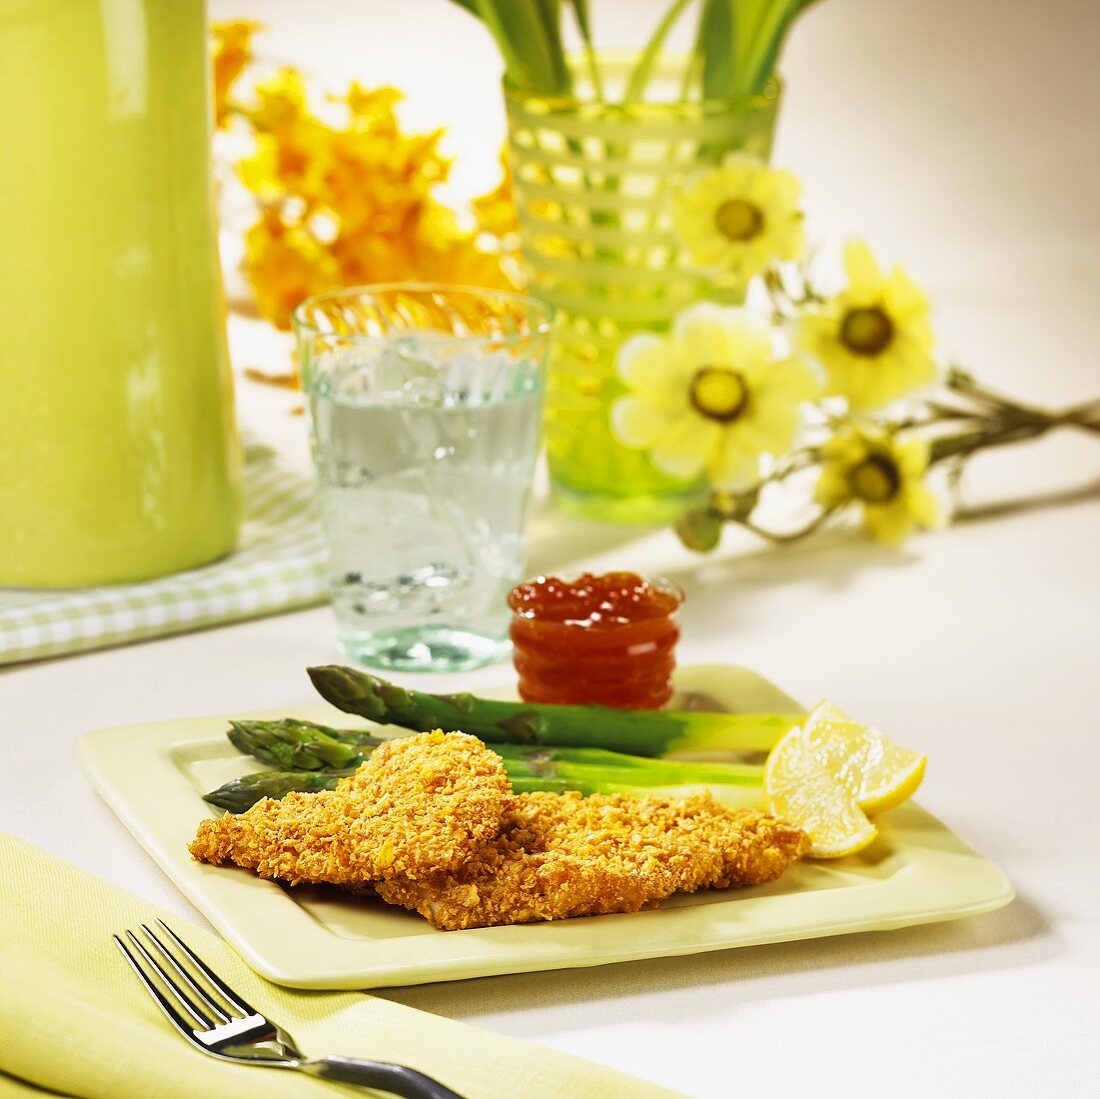 Fried Sole with Asparagus and an Apricot Lemon Sauce